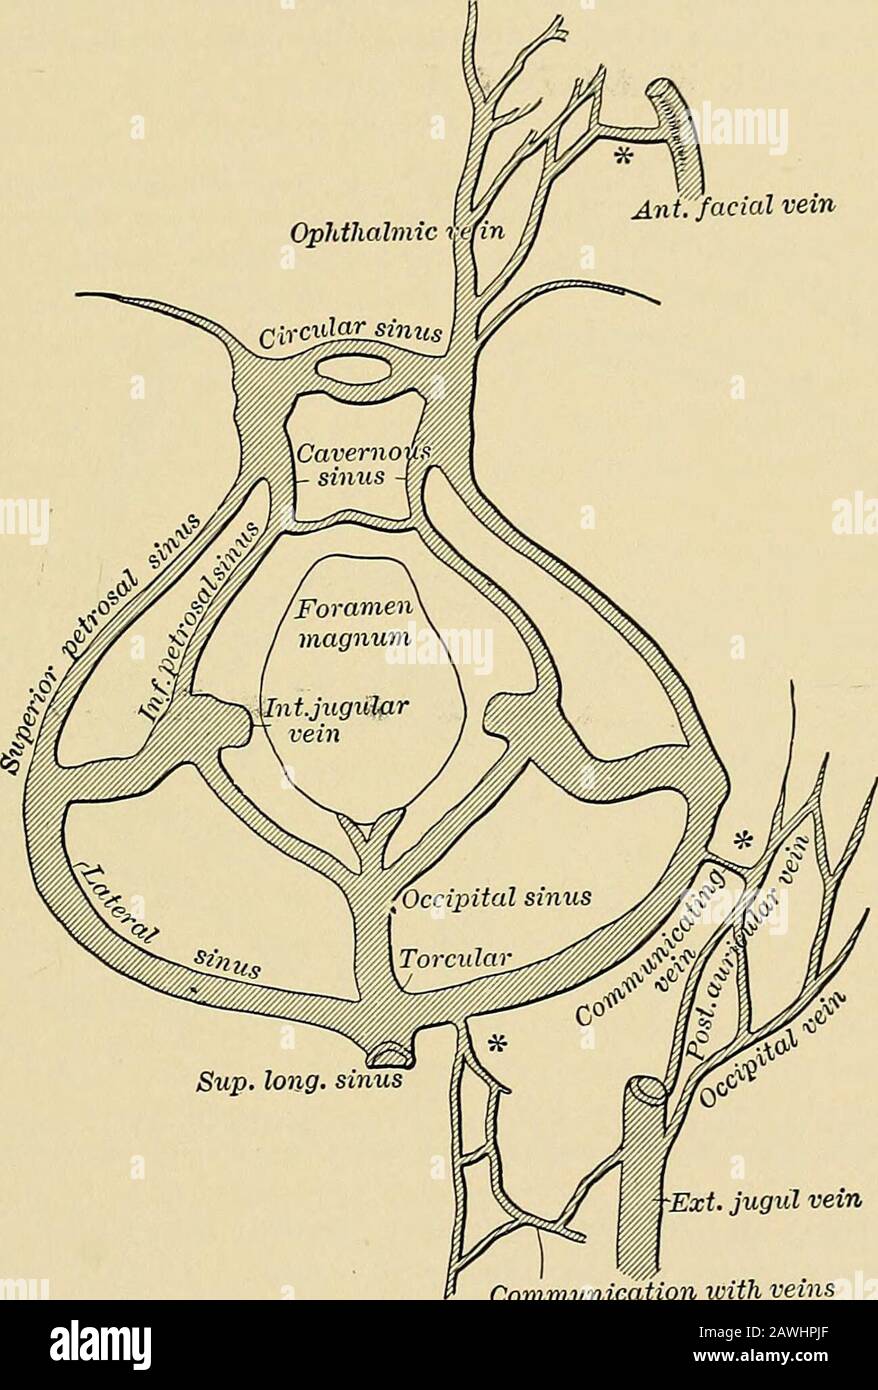 A system of practical medicine . )ecial symptoms, due to inter-ference with the veins which communicate with the extracranial veins,are present. The lateral sinus communicates with these veins by meansof, first, a small vein which passes through the ])()sterior condyloid fora-men, and, secondly, by means of another small vein which passesthrough the mastoid foramen (see Figs. 51 and 52). The latter, which 1 Journ. Amer. Med. Amoc, 1892, xix. pp. 690, 725. *See also Janscn : Archivf. Ohrenheilk., Leipzig, 1893, xxxv. and xxxvi. THROMBOSIS OF THE SINUSES OF THE DURA MATER. 393 is the most import Stock Photo